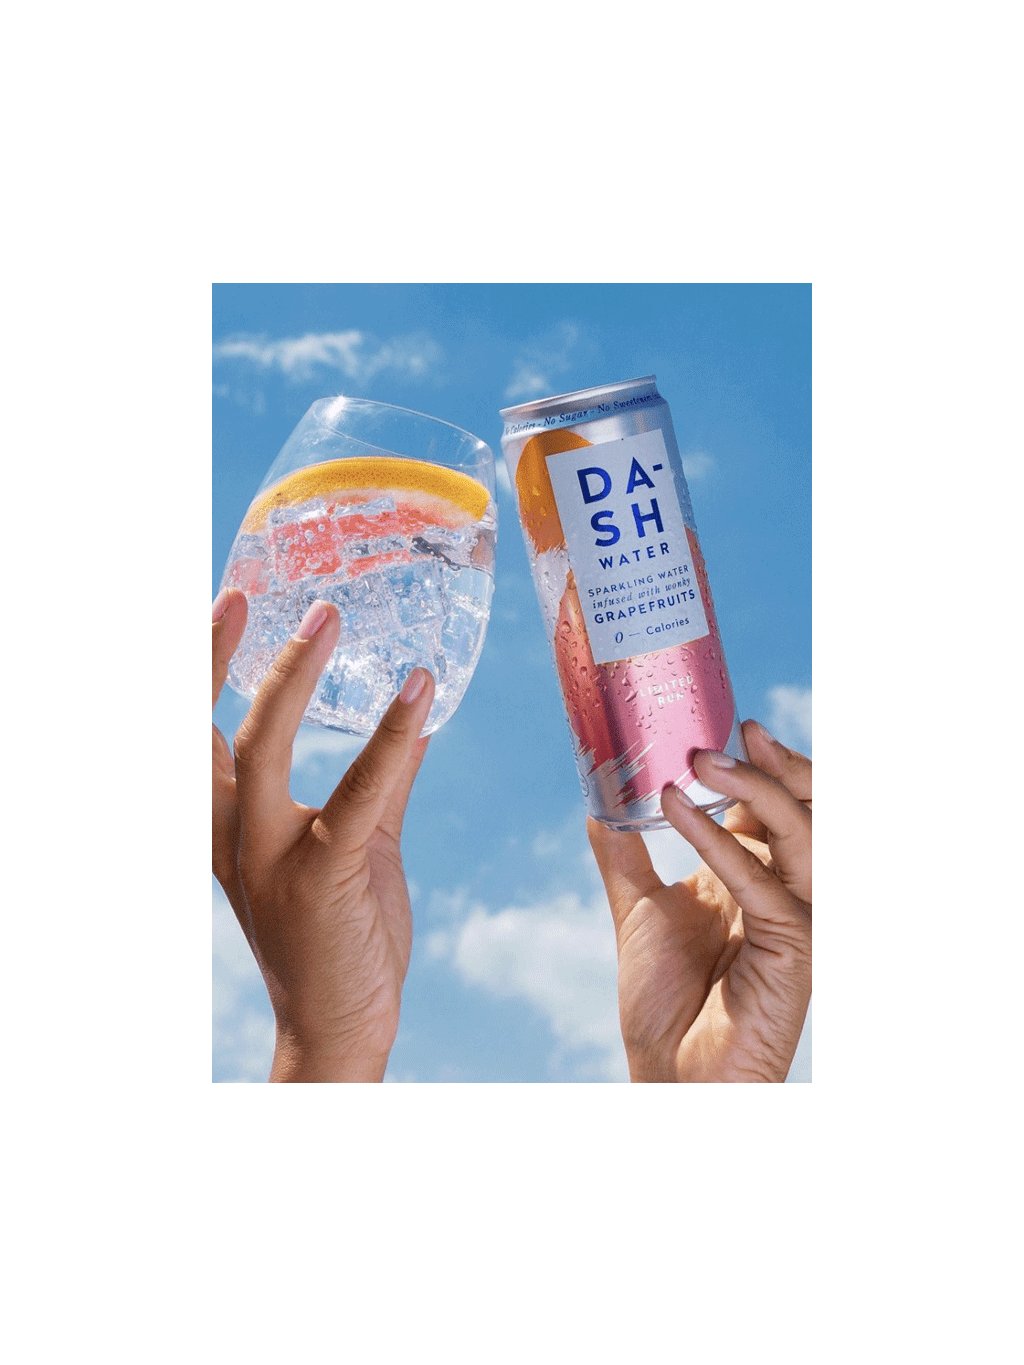 Exciting relaunch for Dash Water with grapefruit flavour - Food and Drink  Technology